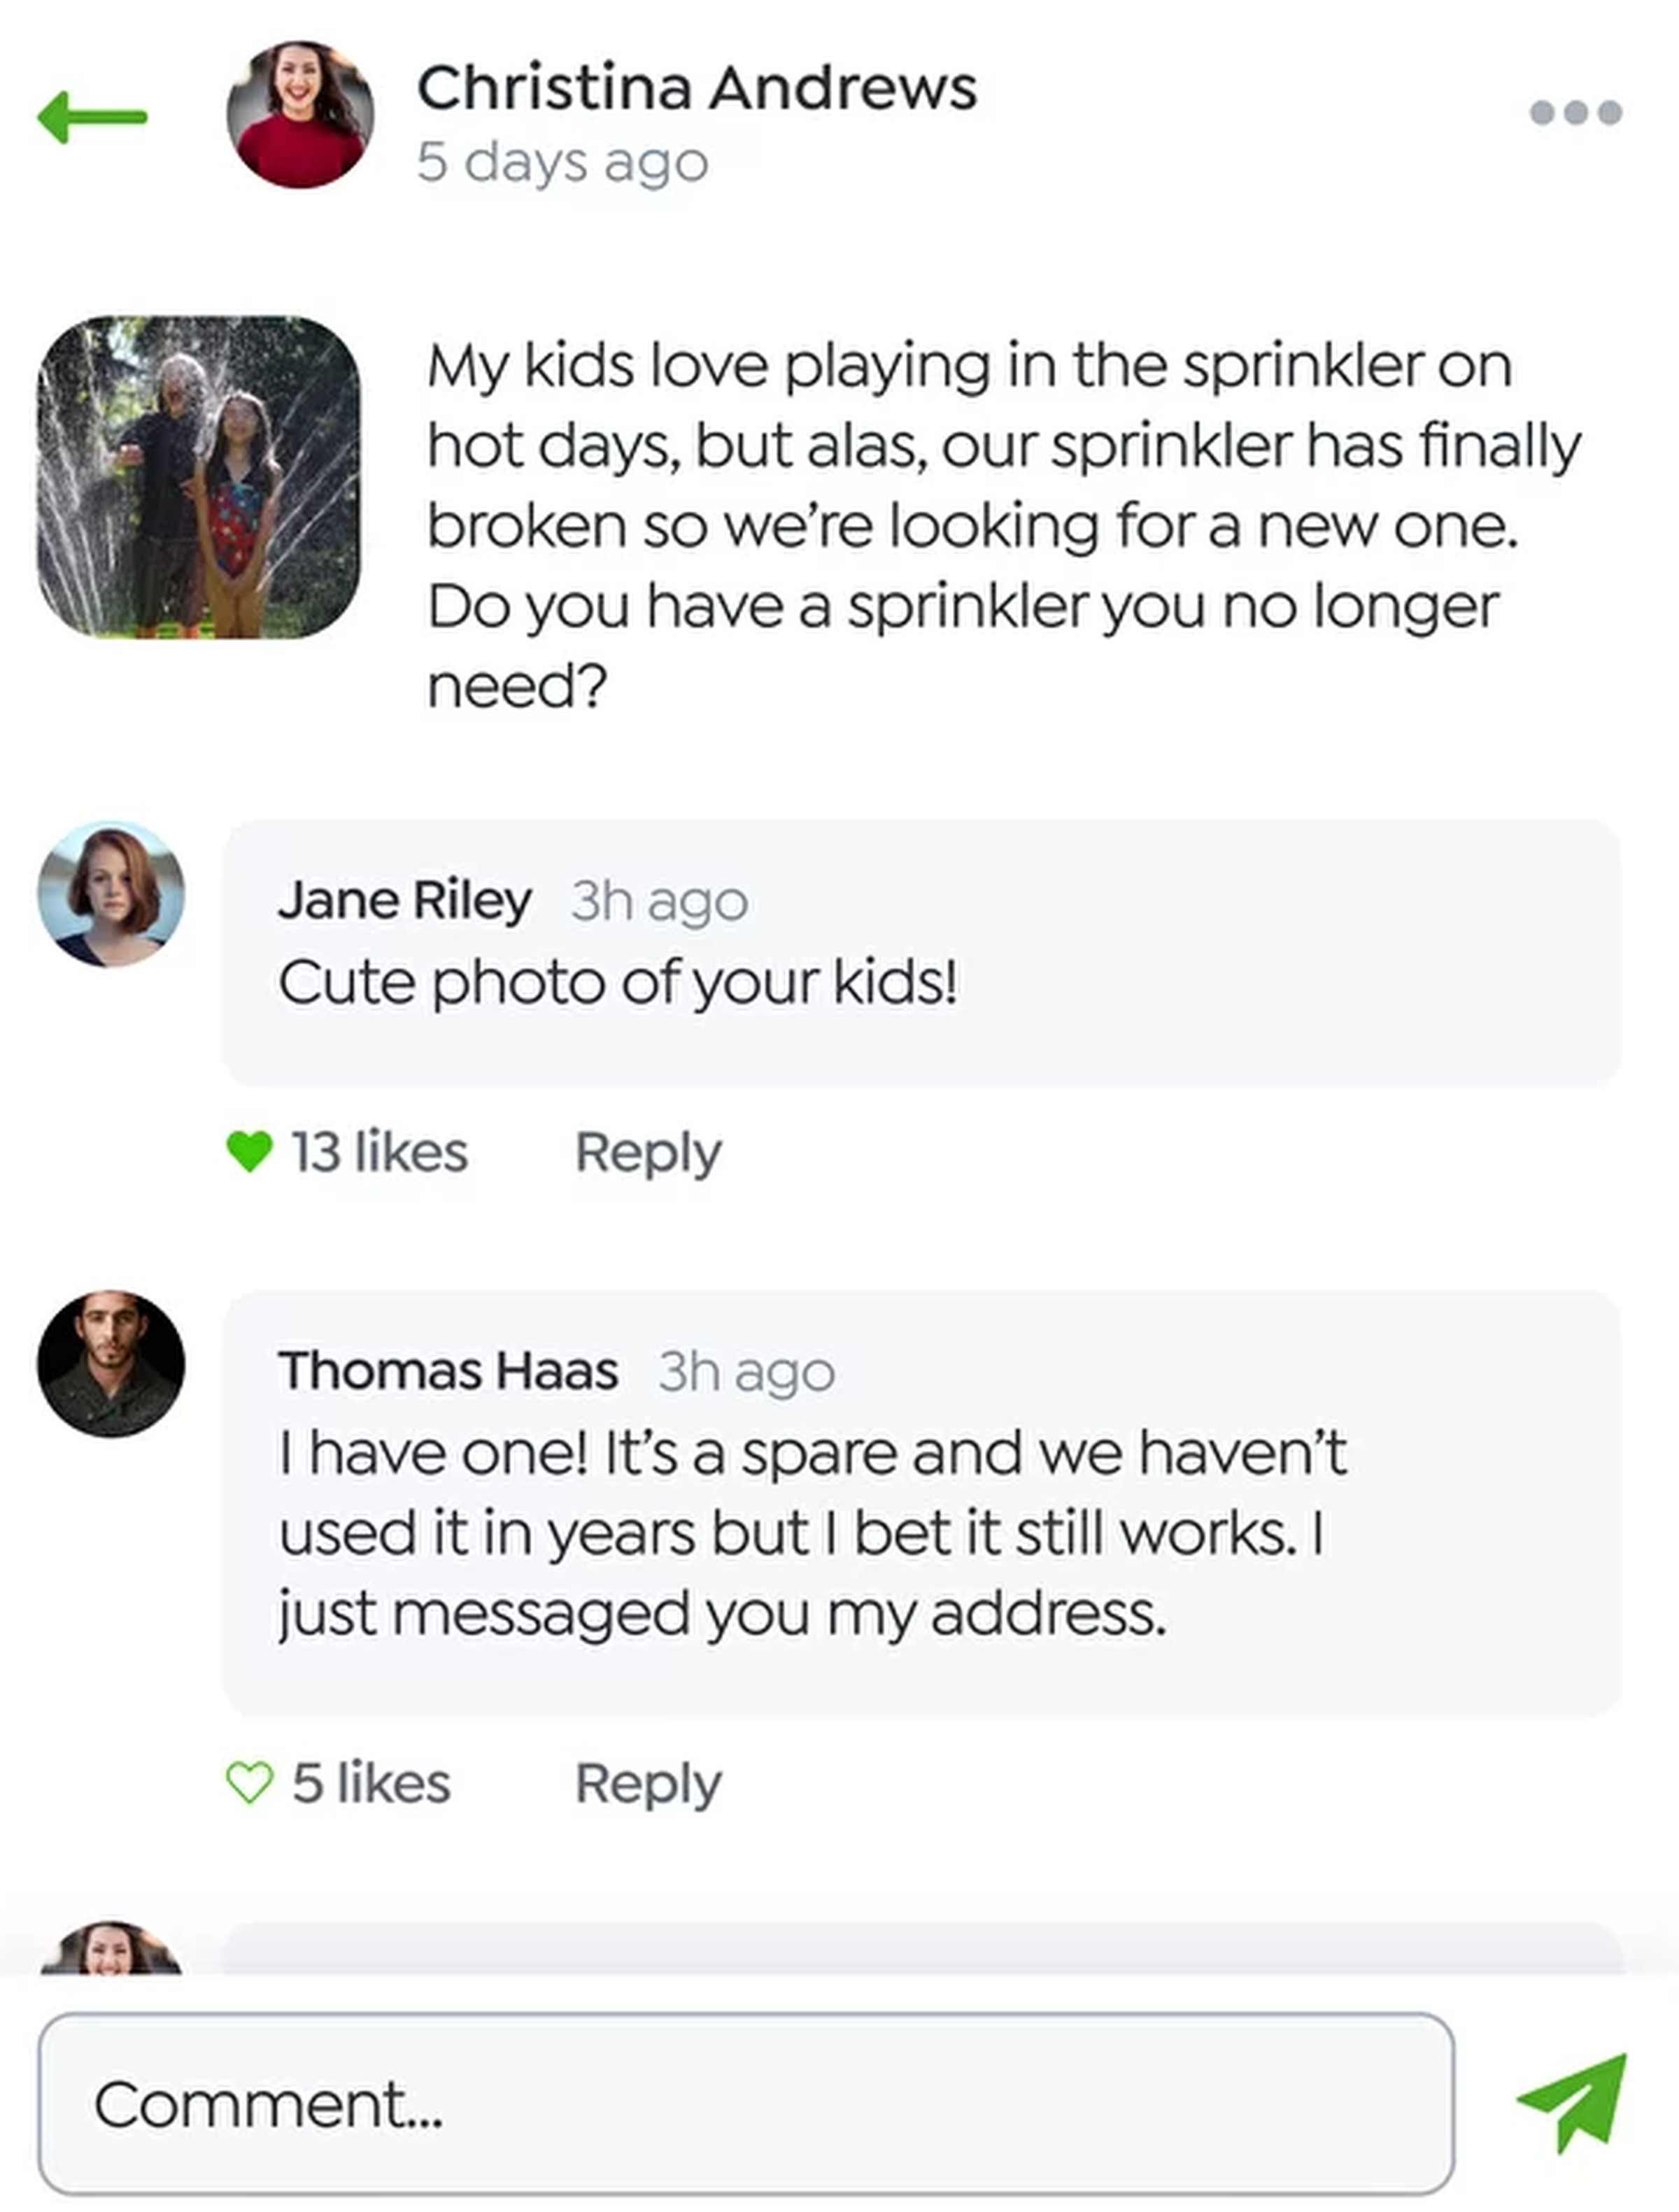 A series of comments of someone asking for and being offered a sprinkler.